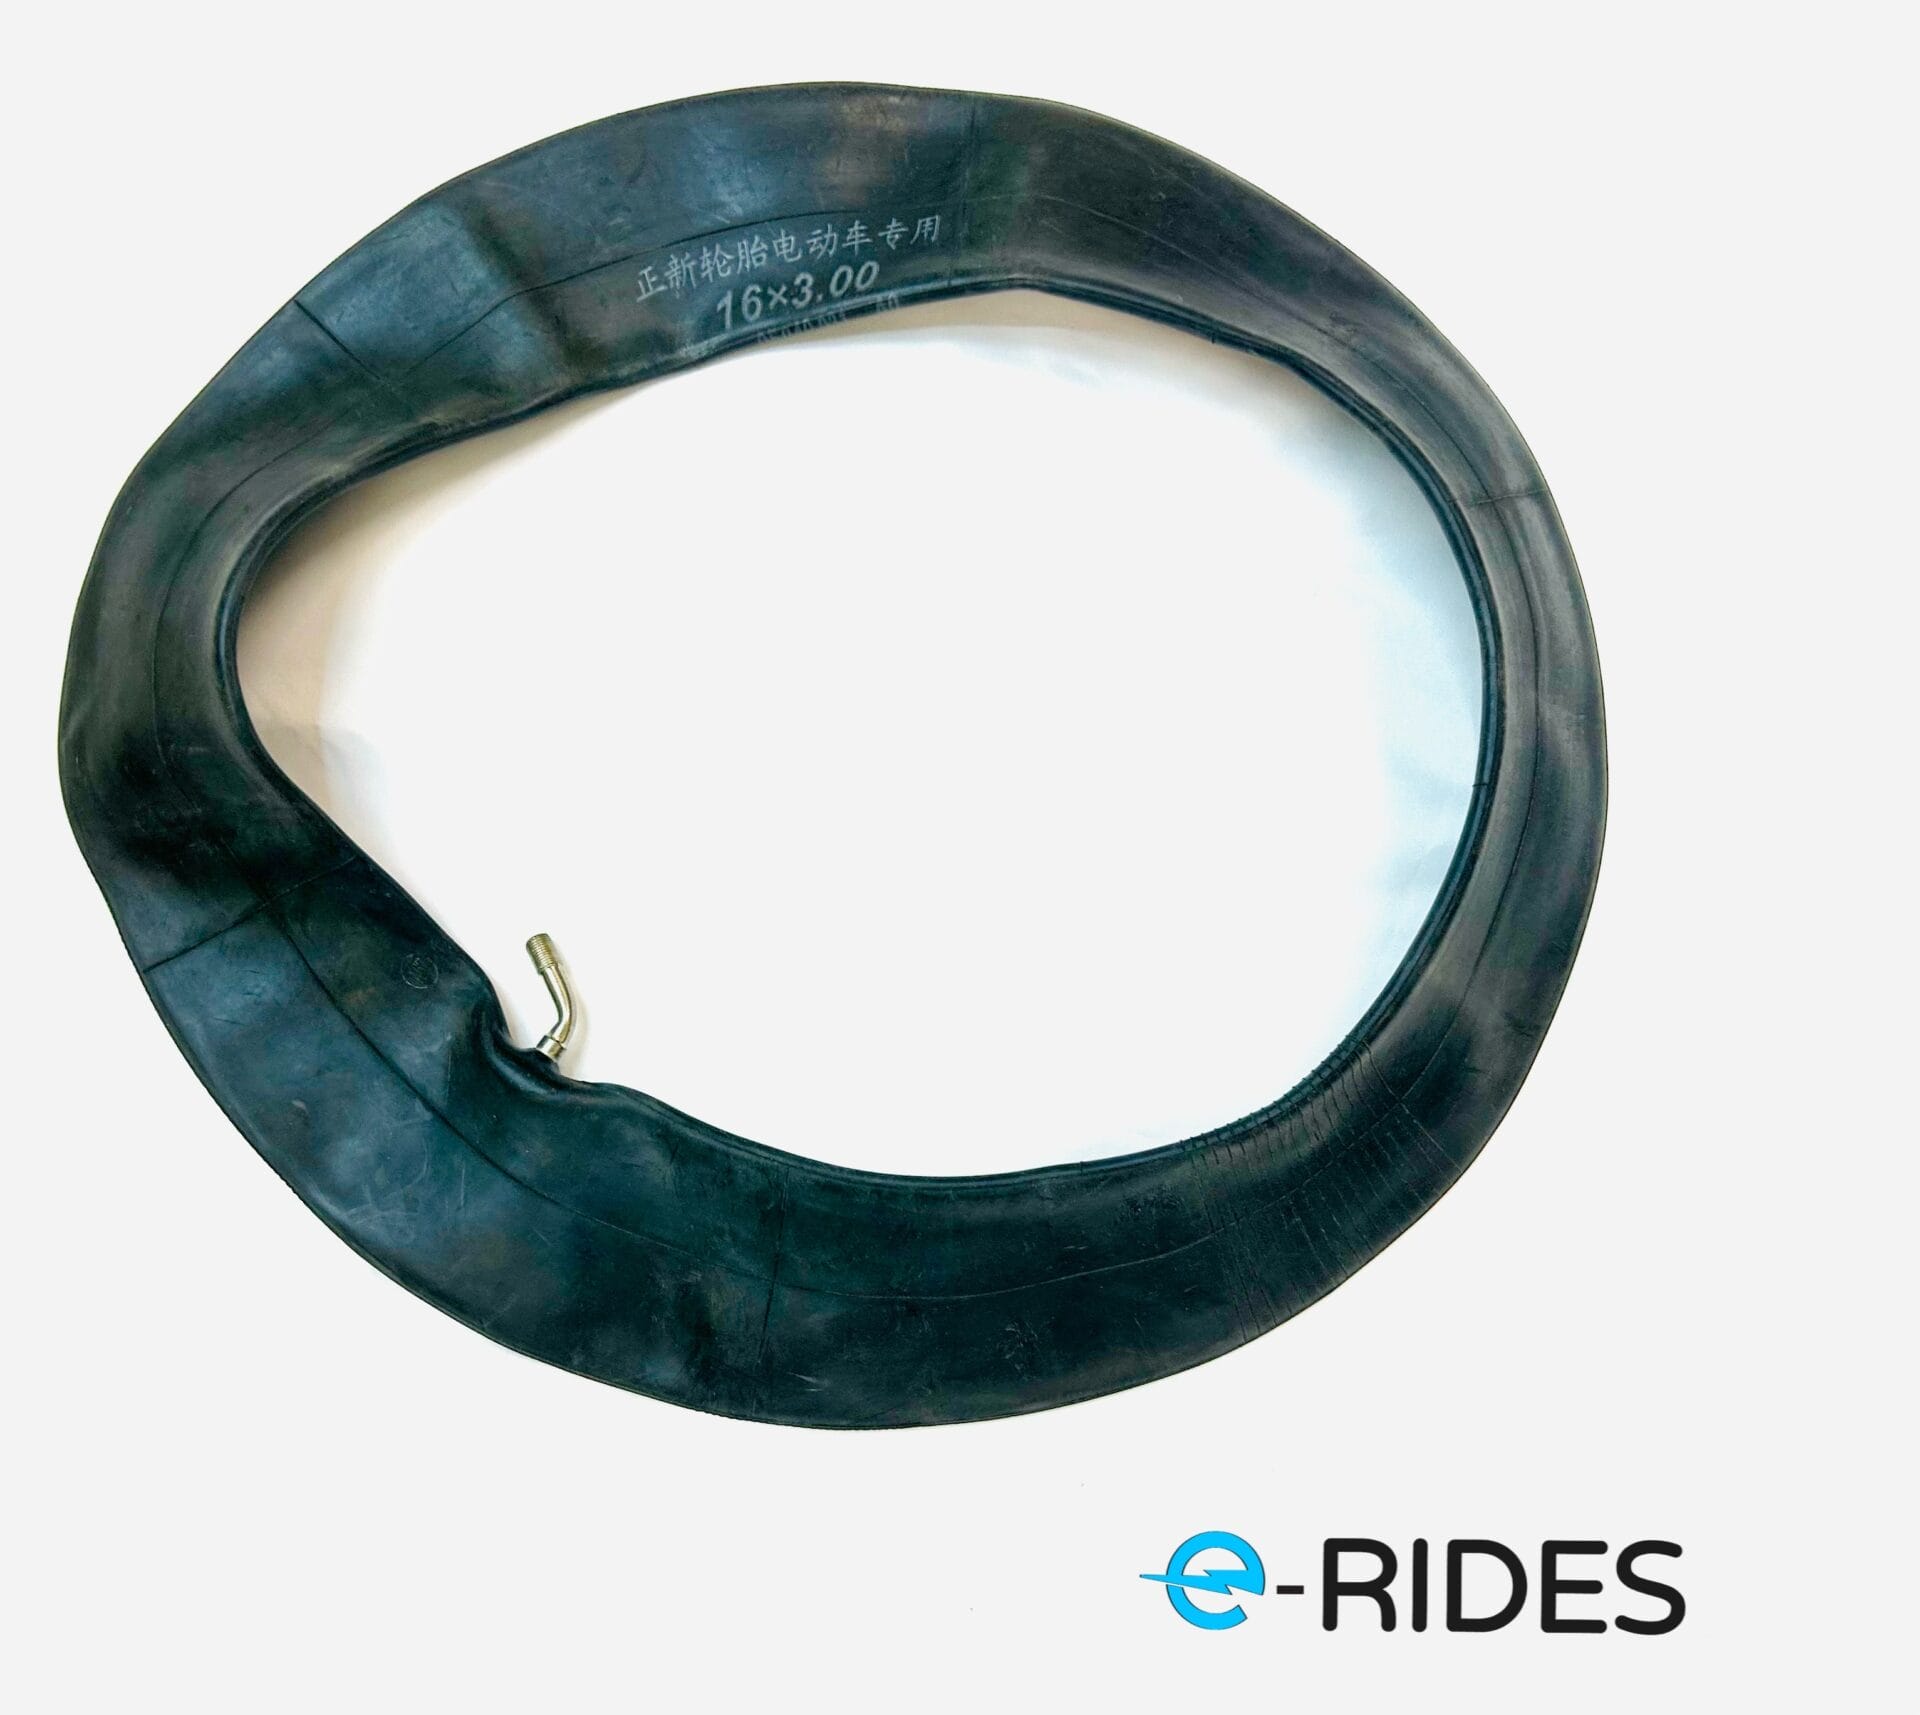 16 X 3 Inner Tube for Electric Unicycles - 16 x 3 inch